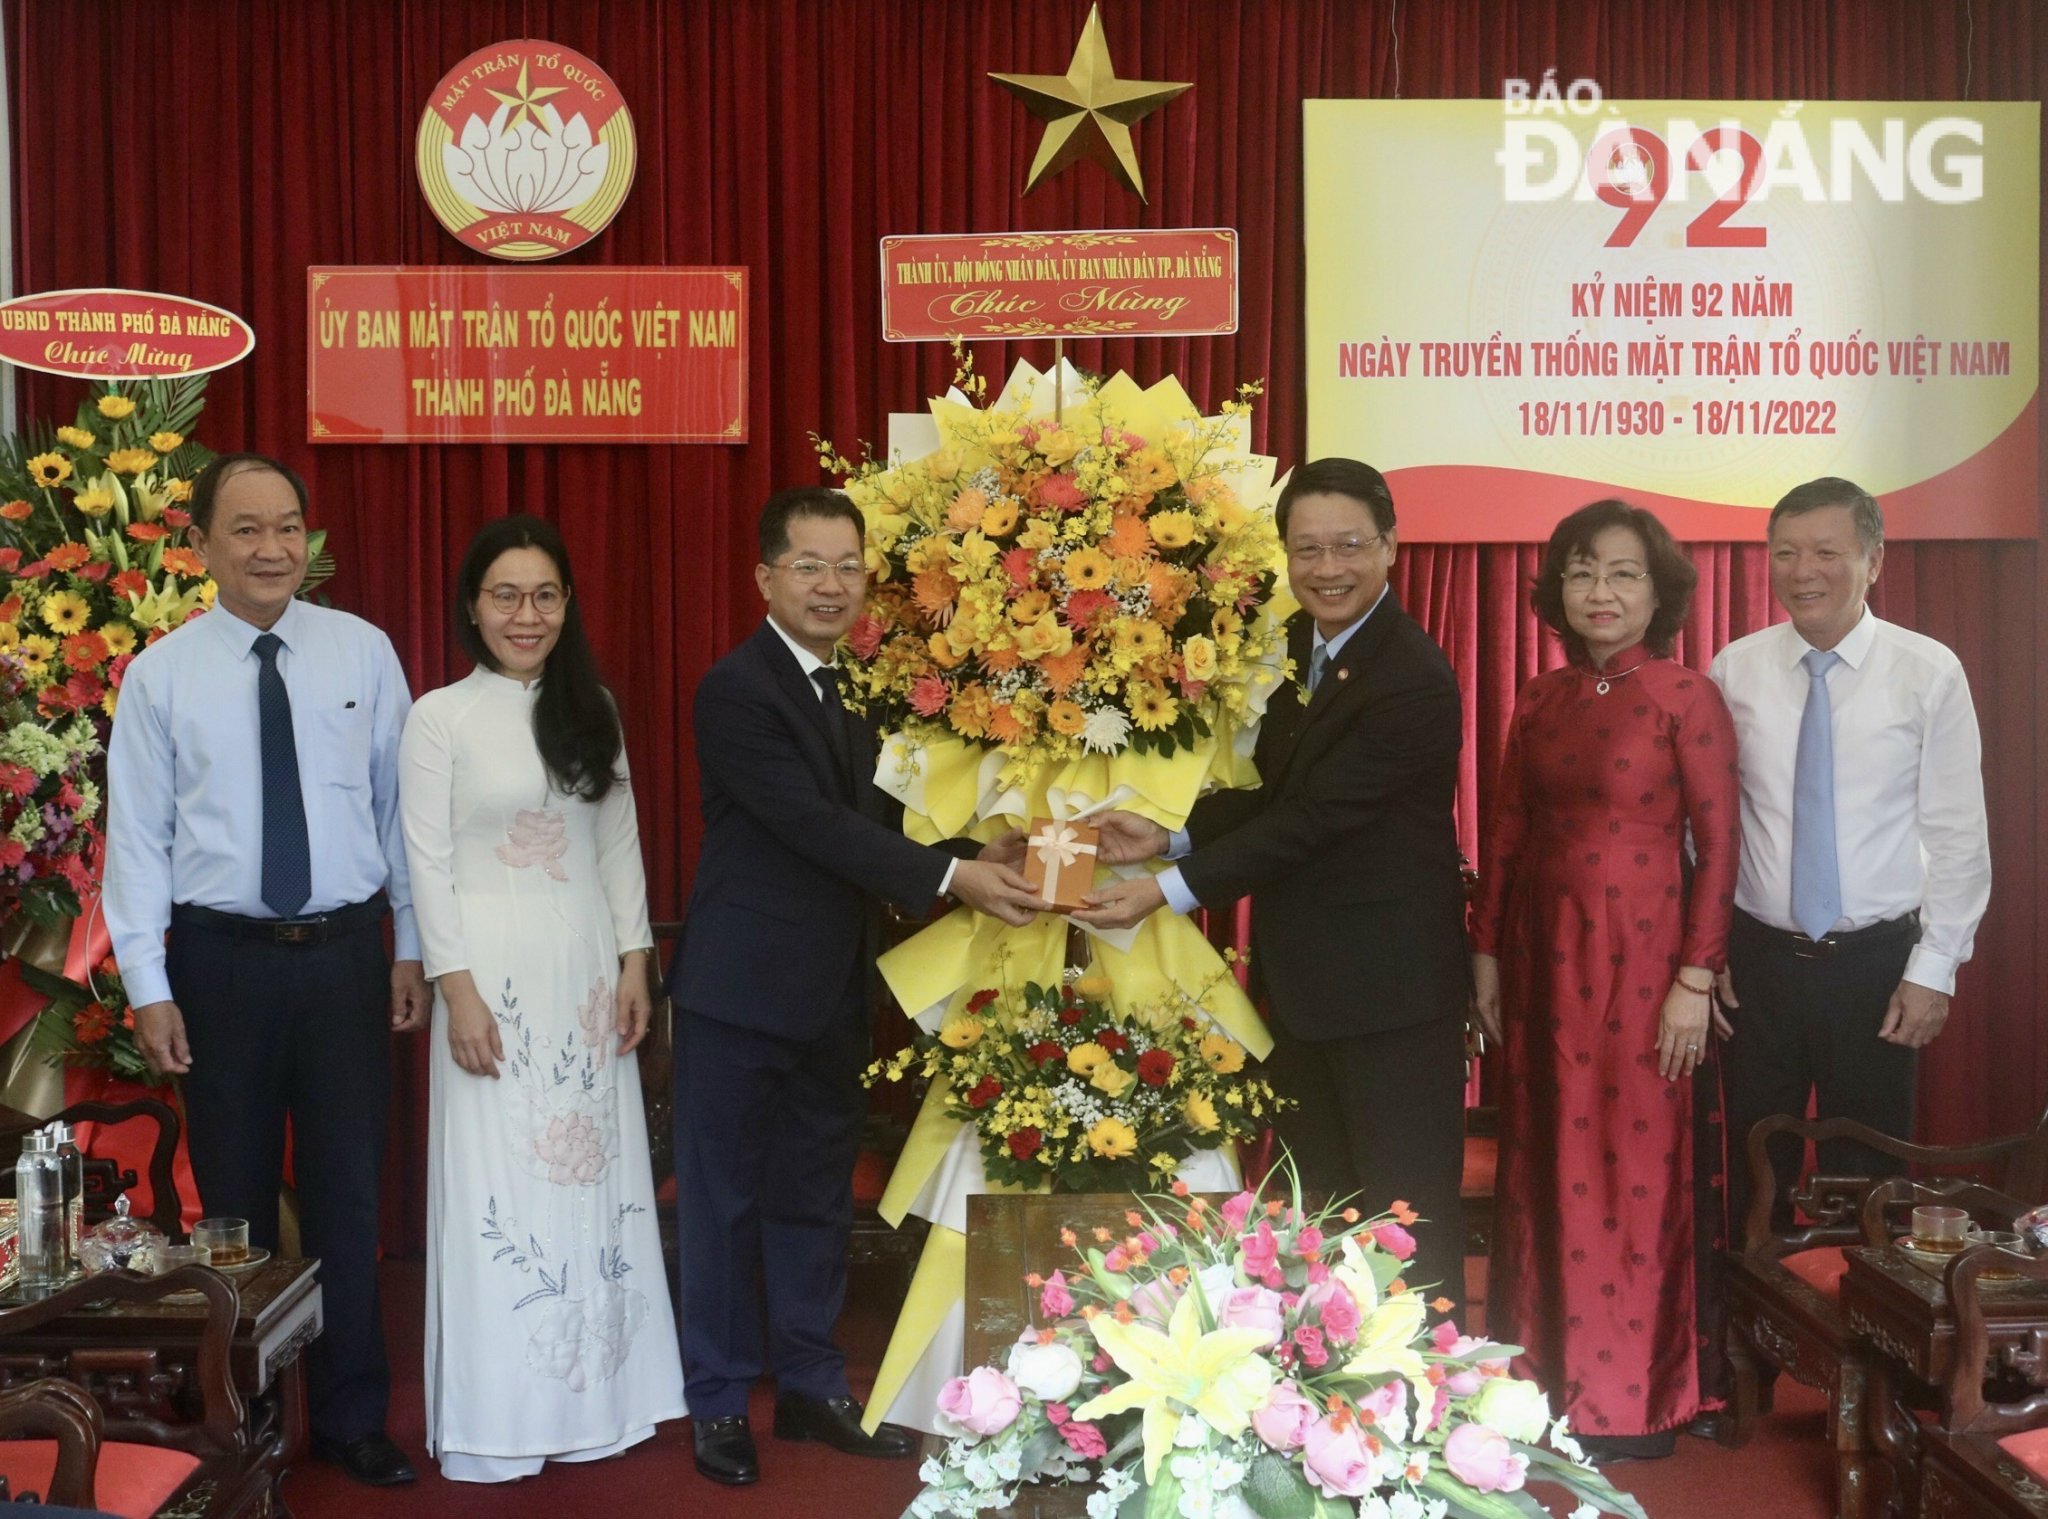 Da Nang Party Committee Secretary Nguyen Van Quang (third, left) congratulating the city's Fatherland Front Committee on the occasion of the 92nd anniversary of Traditional Day of Viet Nam Fatherland Front